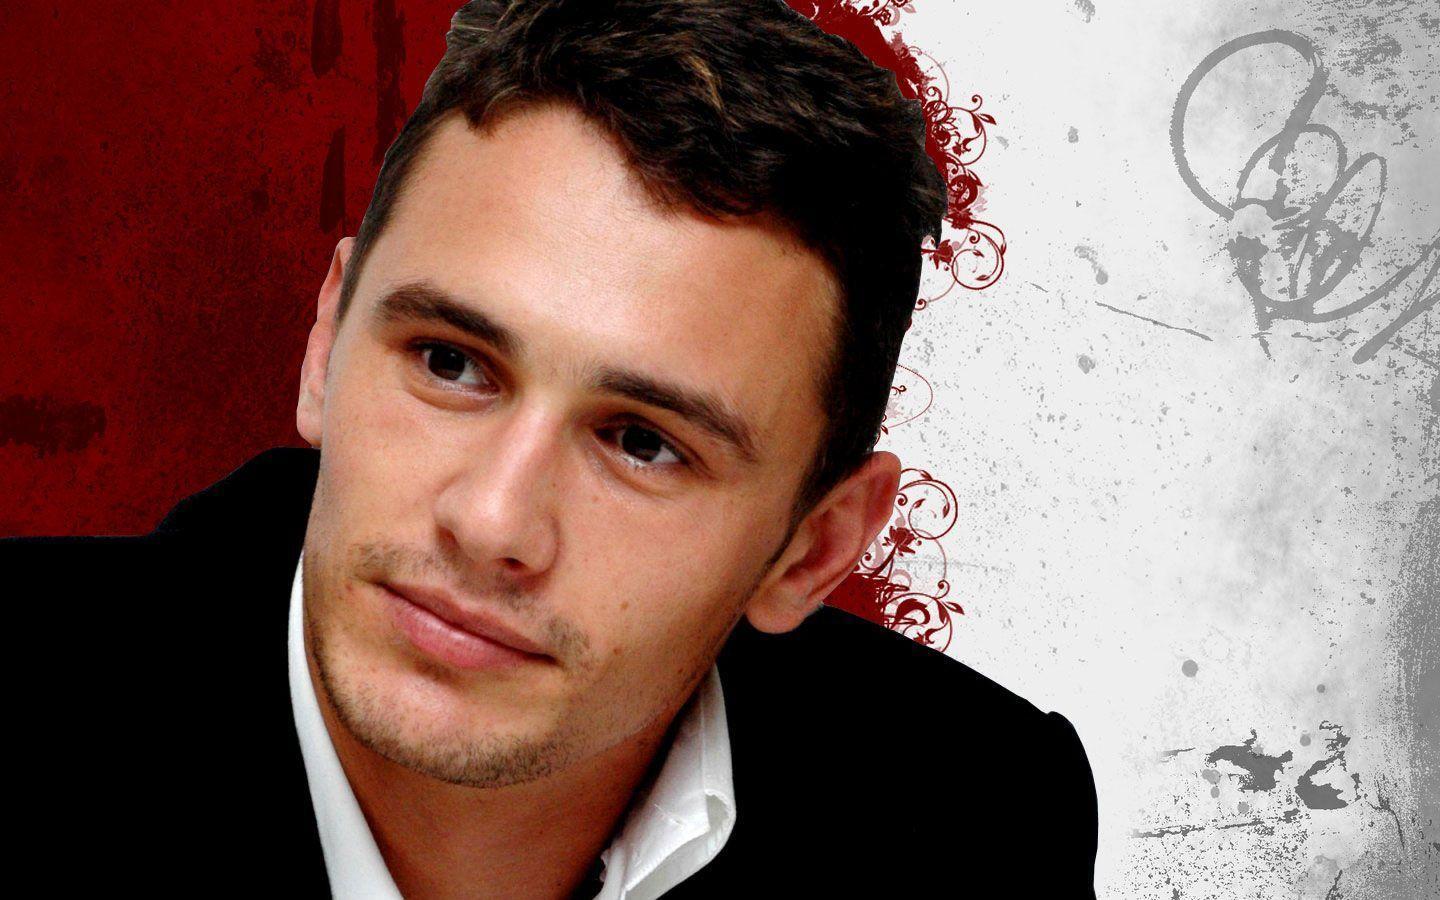 Wallpaper of male celebrities of hollywood: James Franco